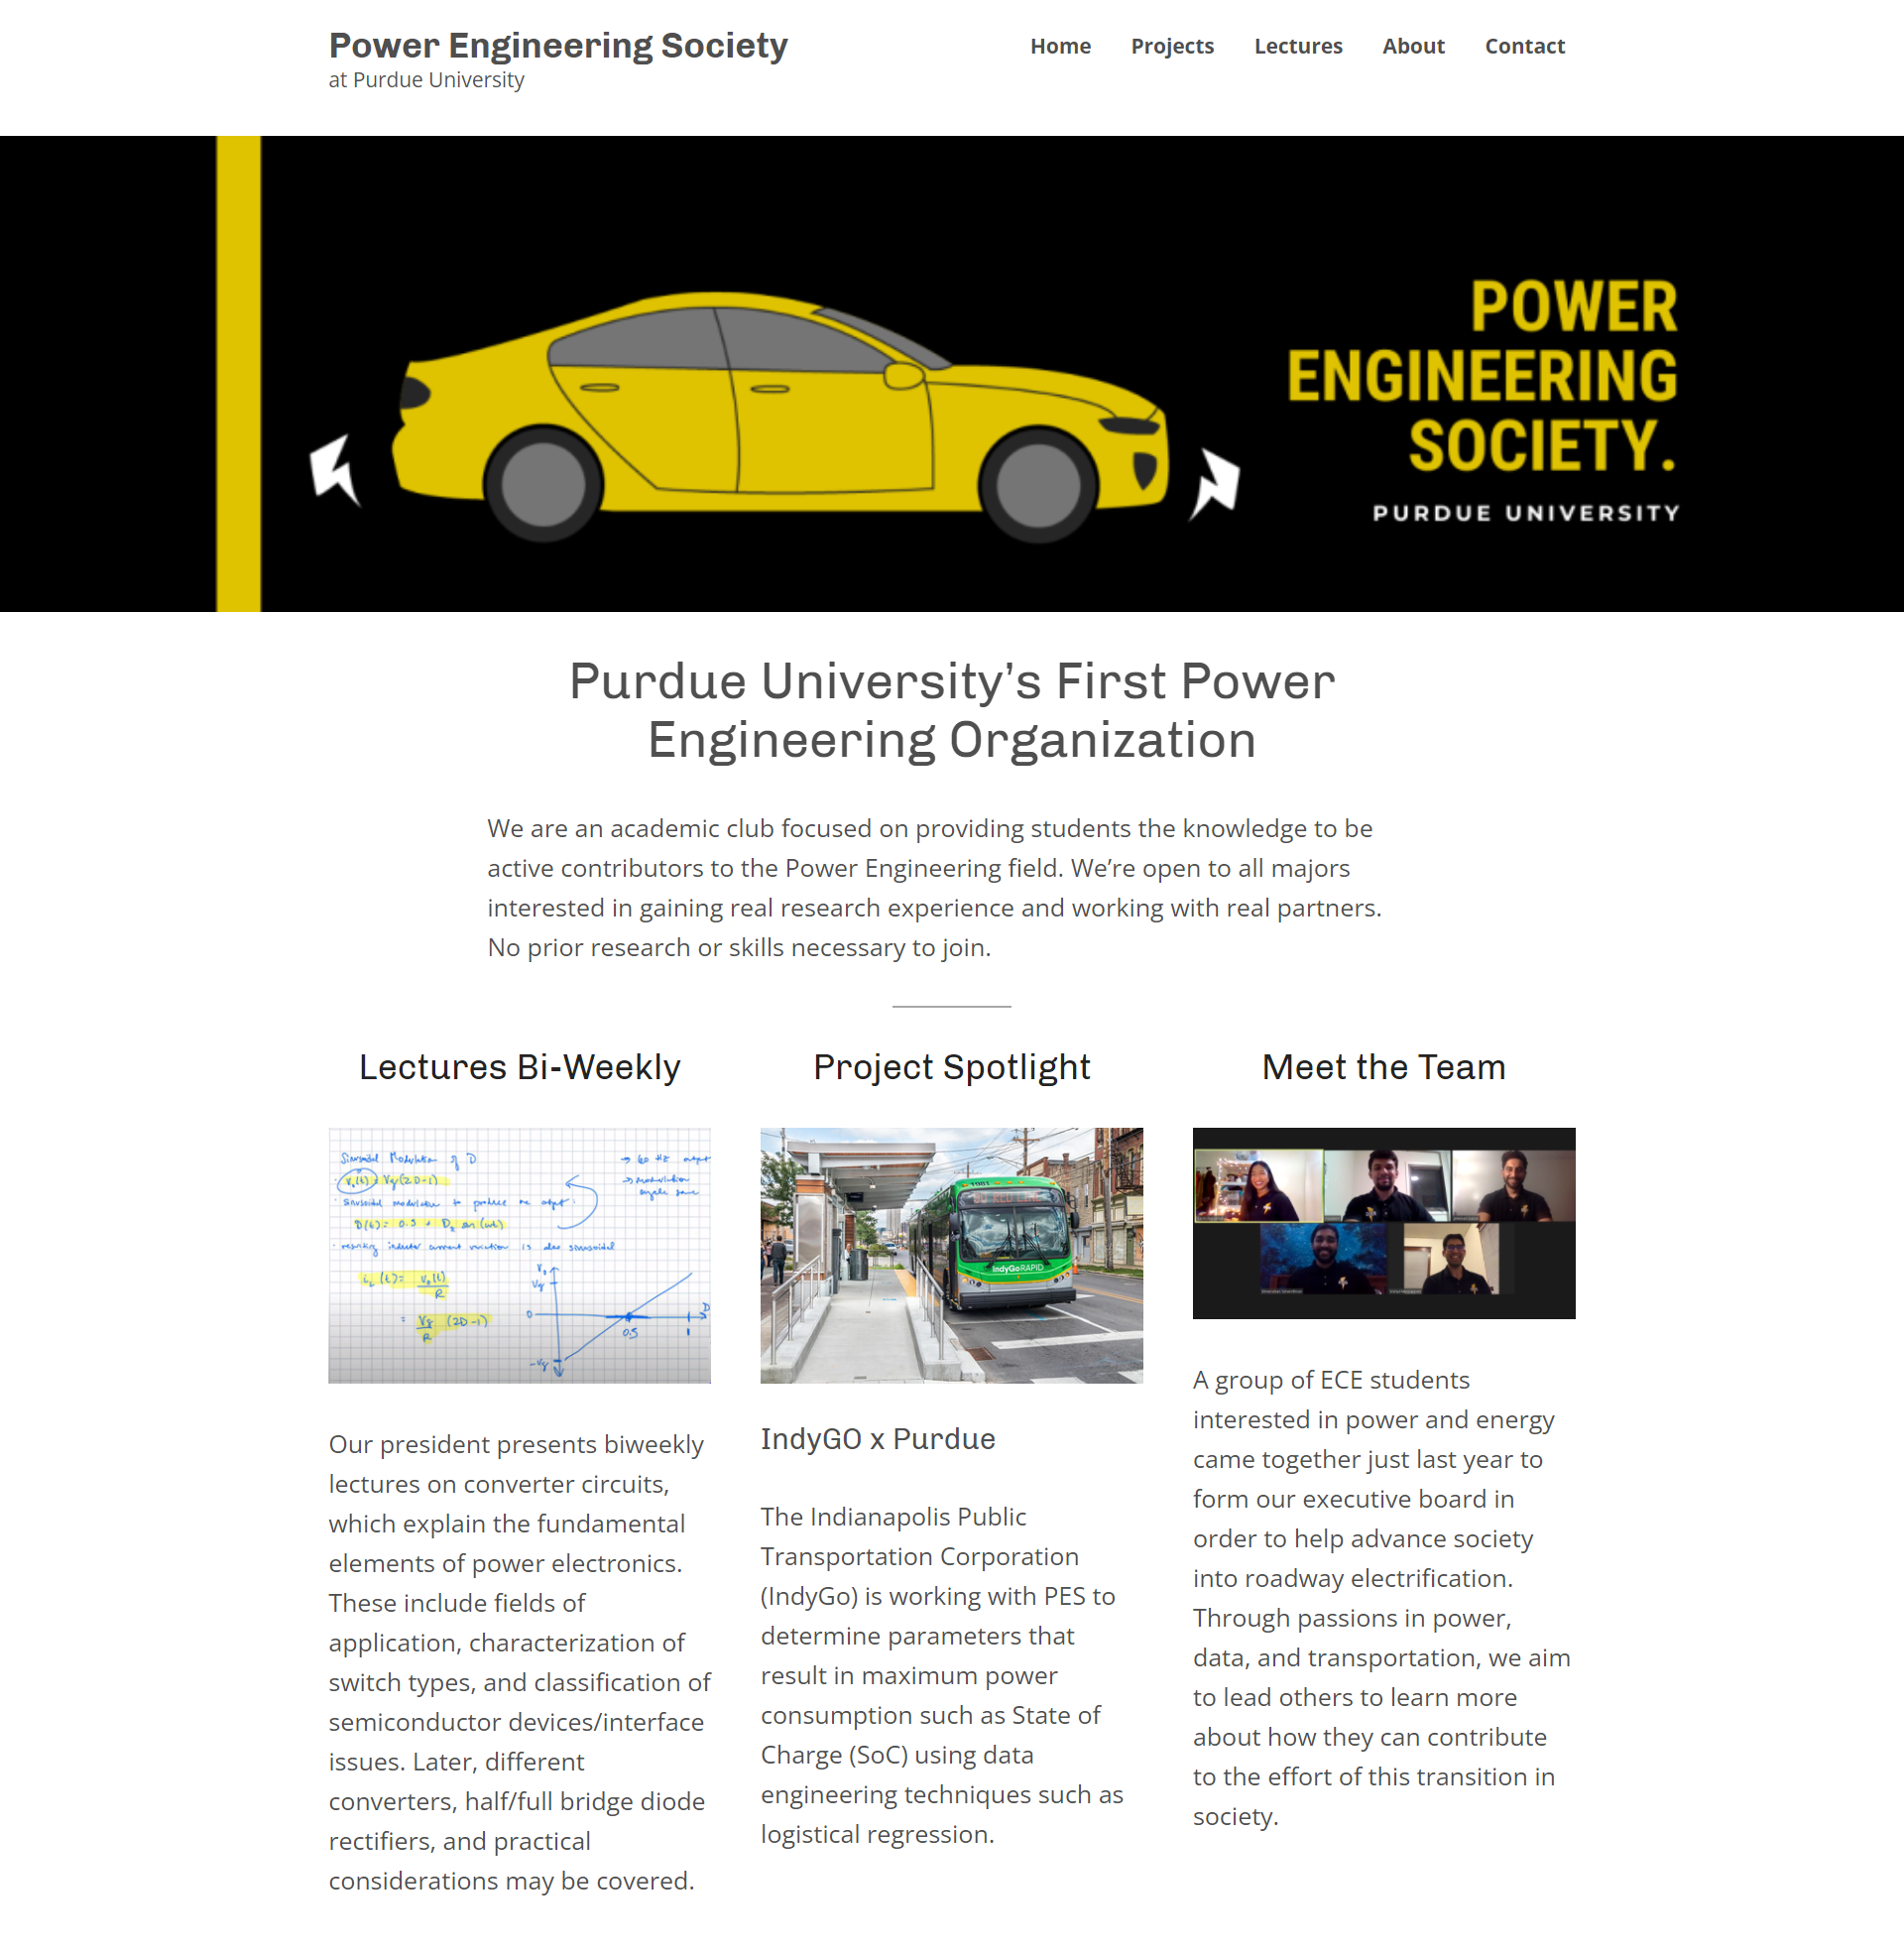 Power Engineering Society home page